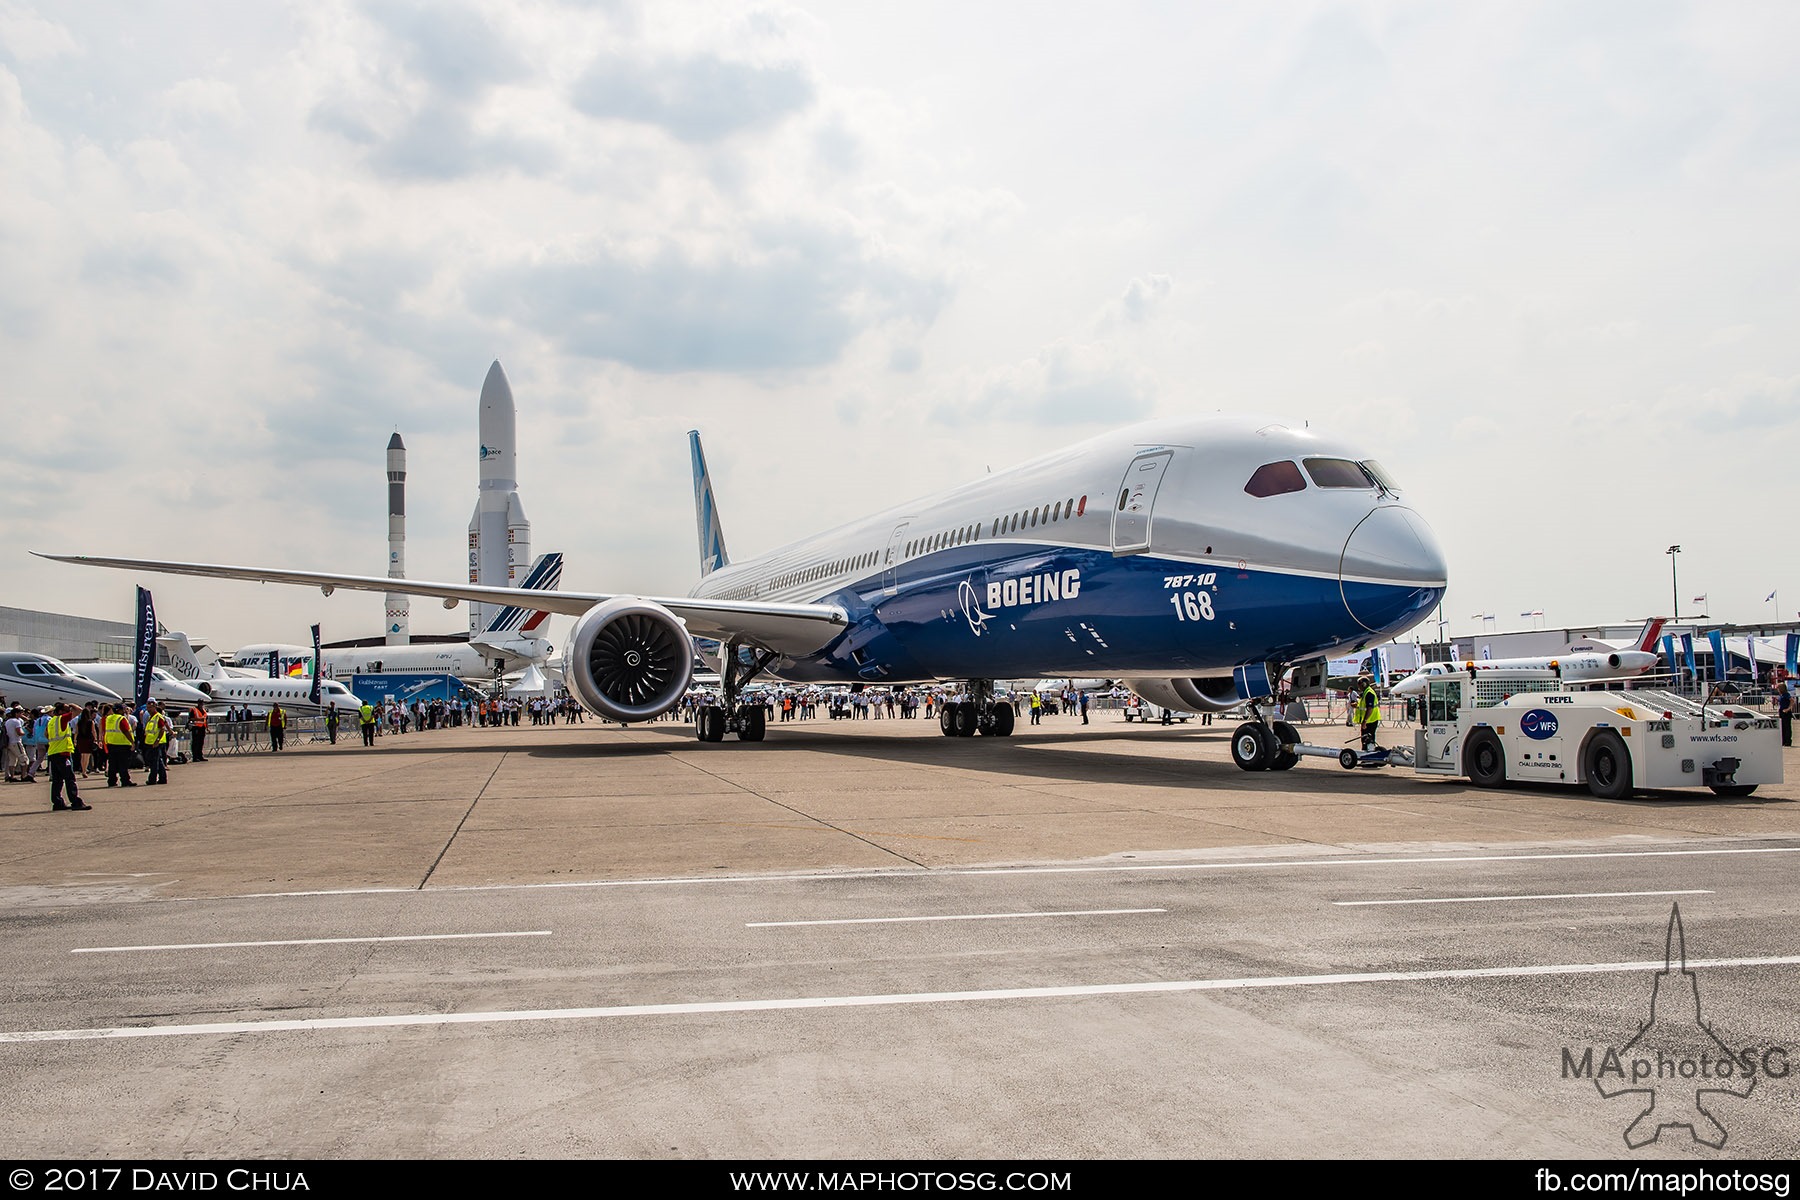 38. Boeing 787-10 Dreamliner being moved from it’s Static Display.